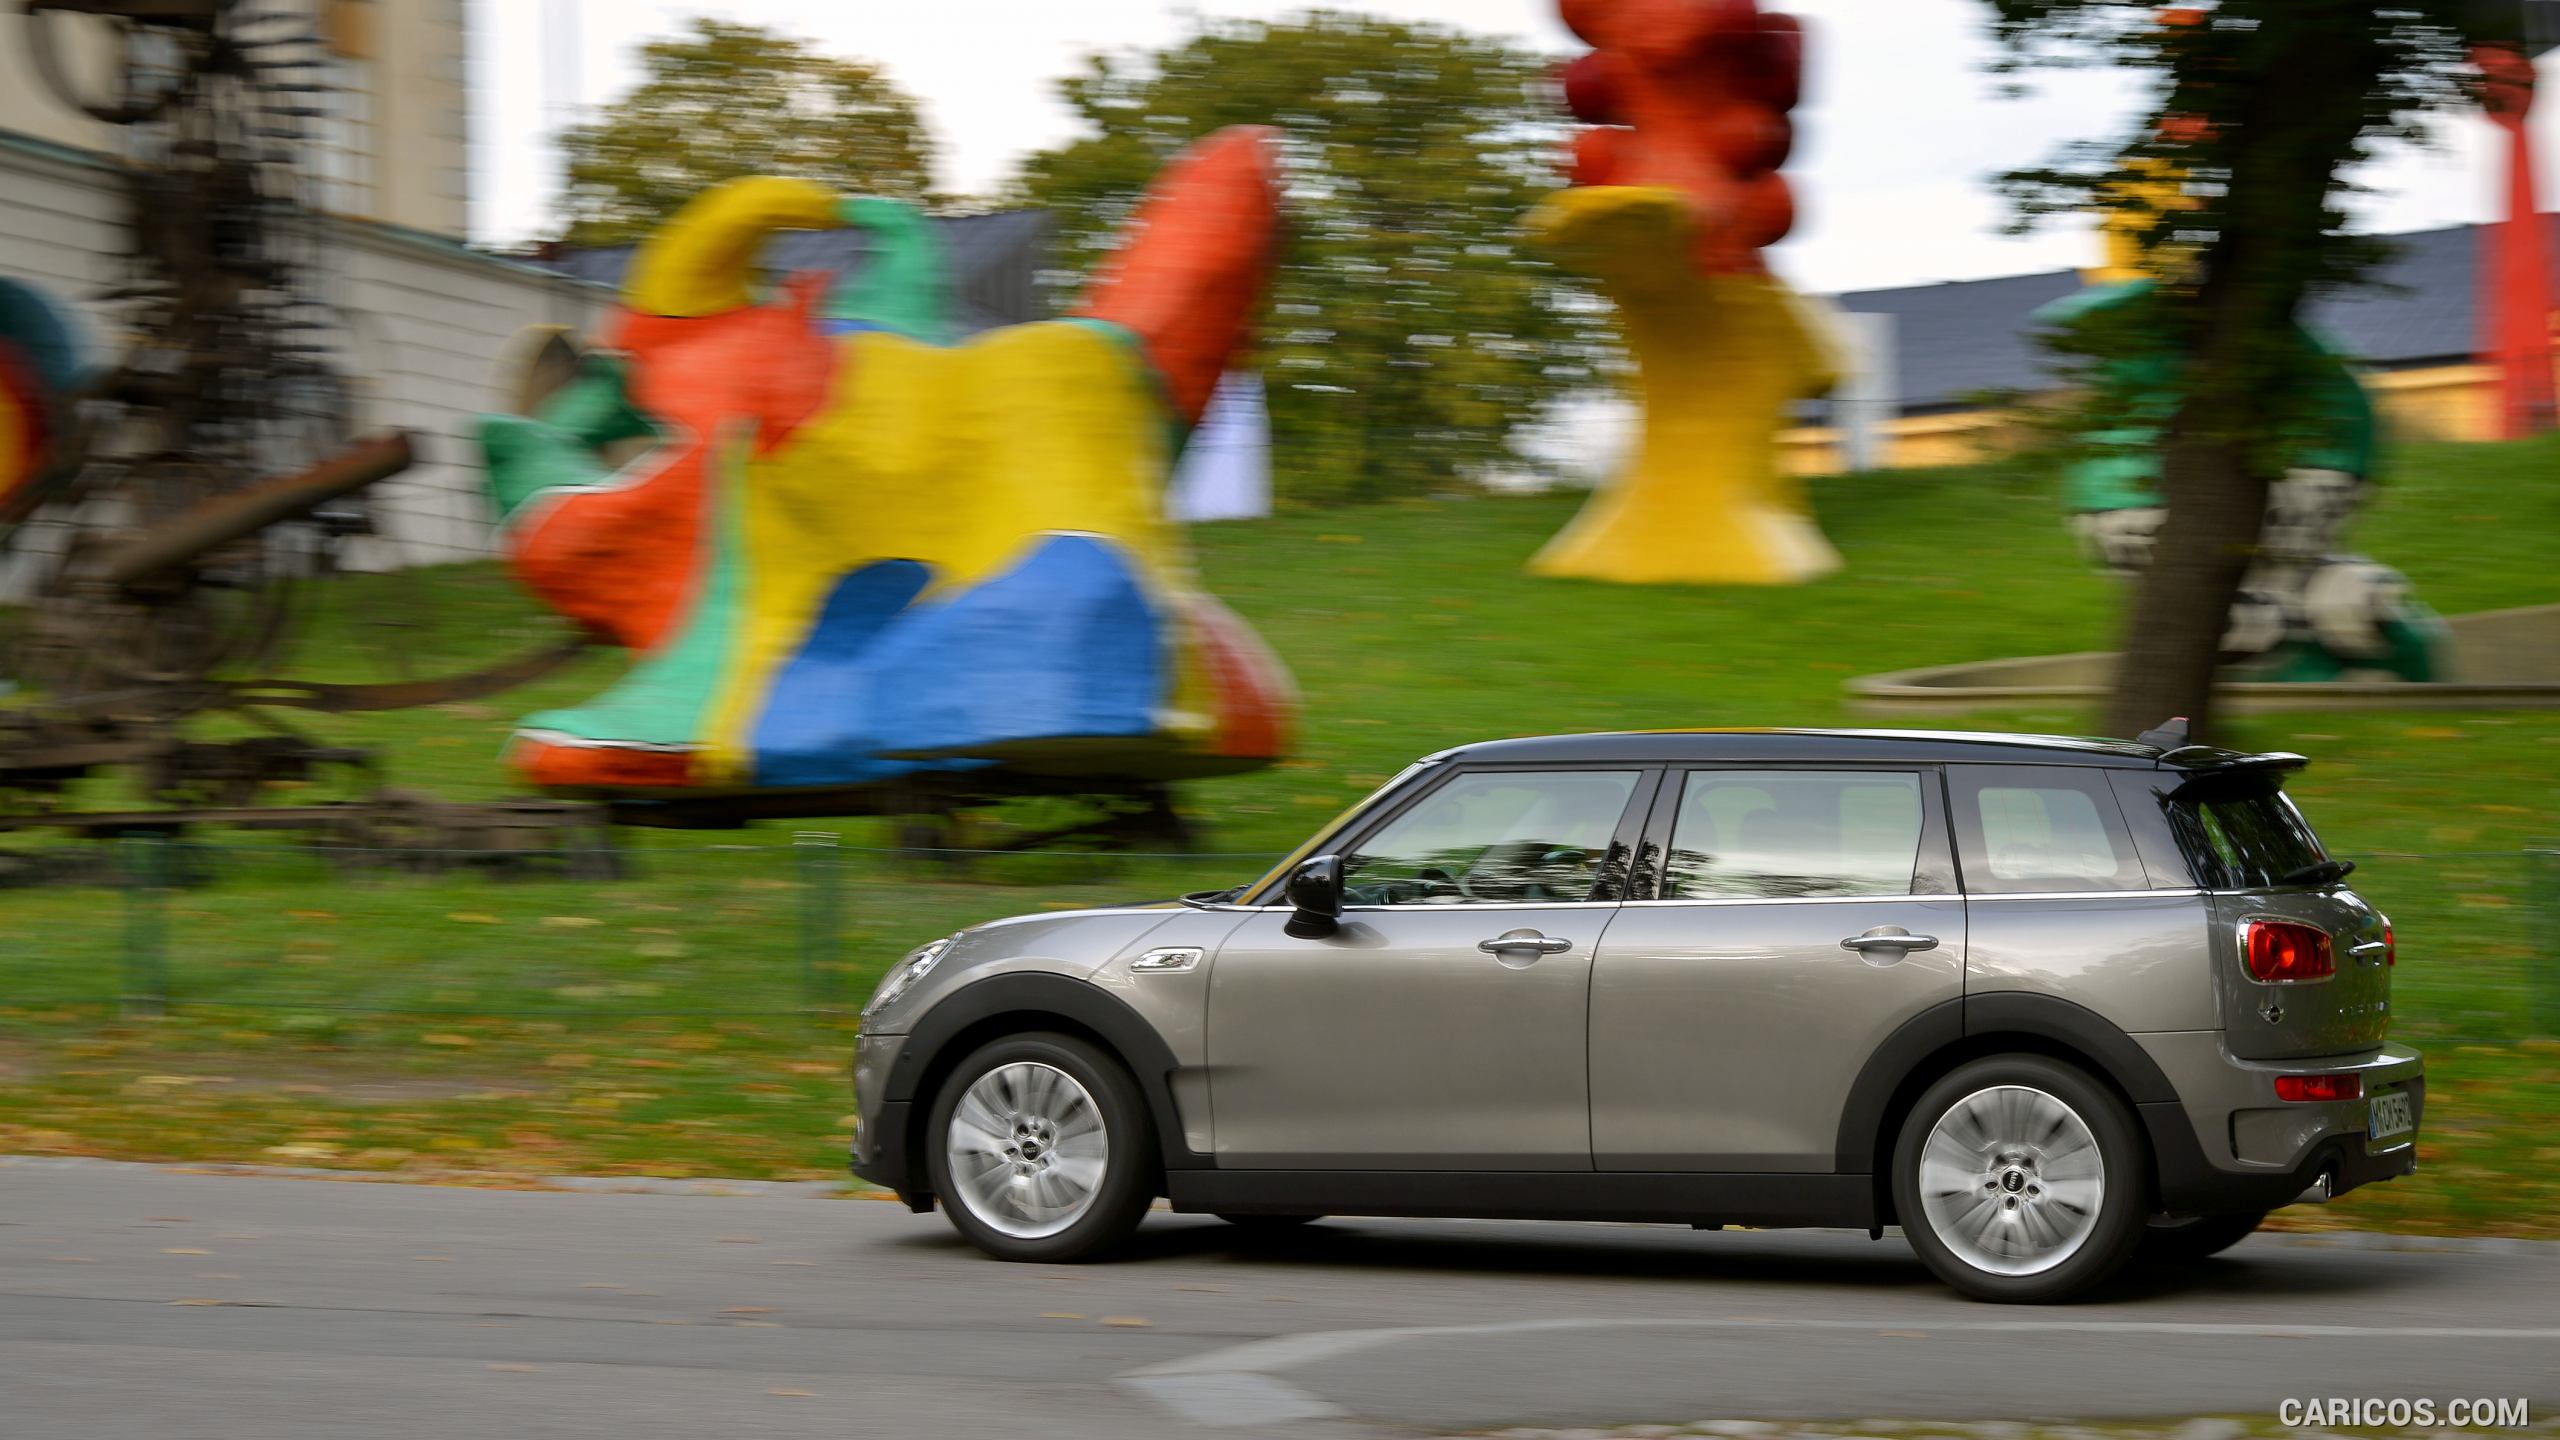 2016 MINI Cooper S Clubman in Metallic Melting Silver - Side, #176 of 380